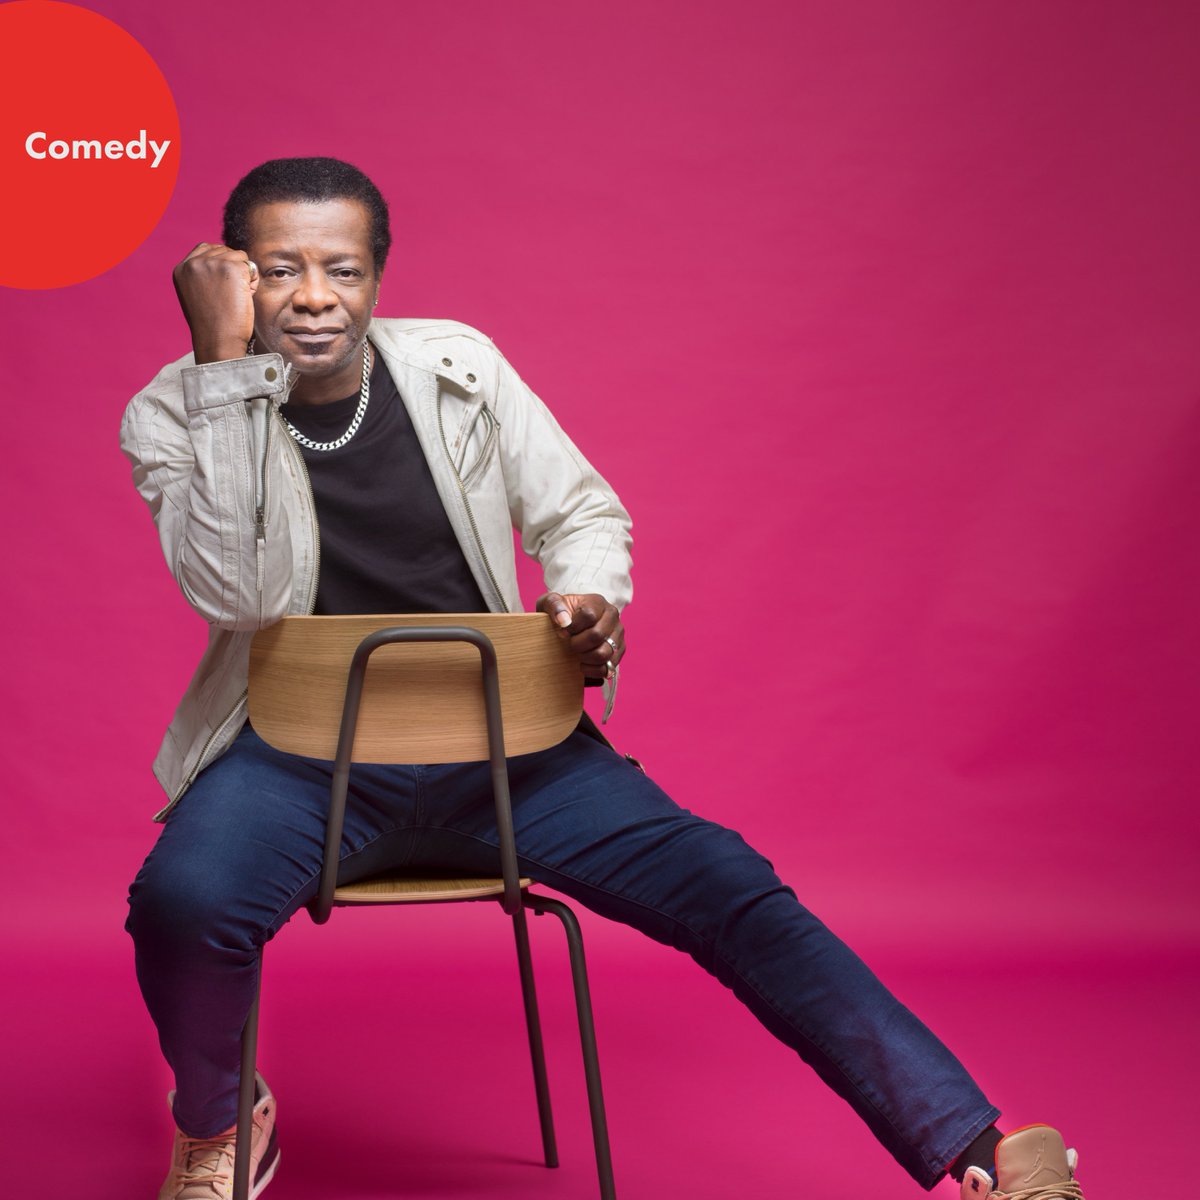 In case you haven't heard yet...Stephen K Amos will be taking to The Phoenix Stage in November! 📅 Friday 3rd November, 8:00 PM 🎟 Tickets £18.00 (General), £16.00 (Concessions/Members) Tickets: bit.ly/OxymoronAmos